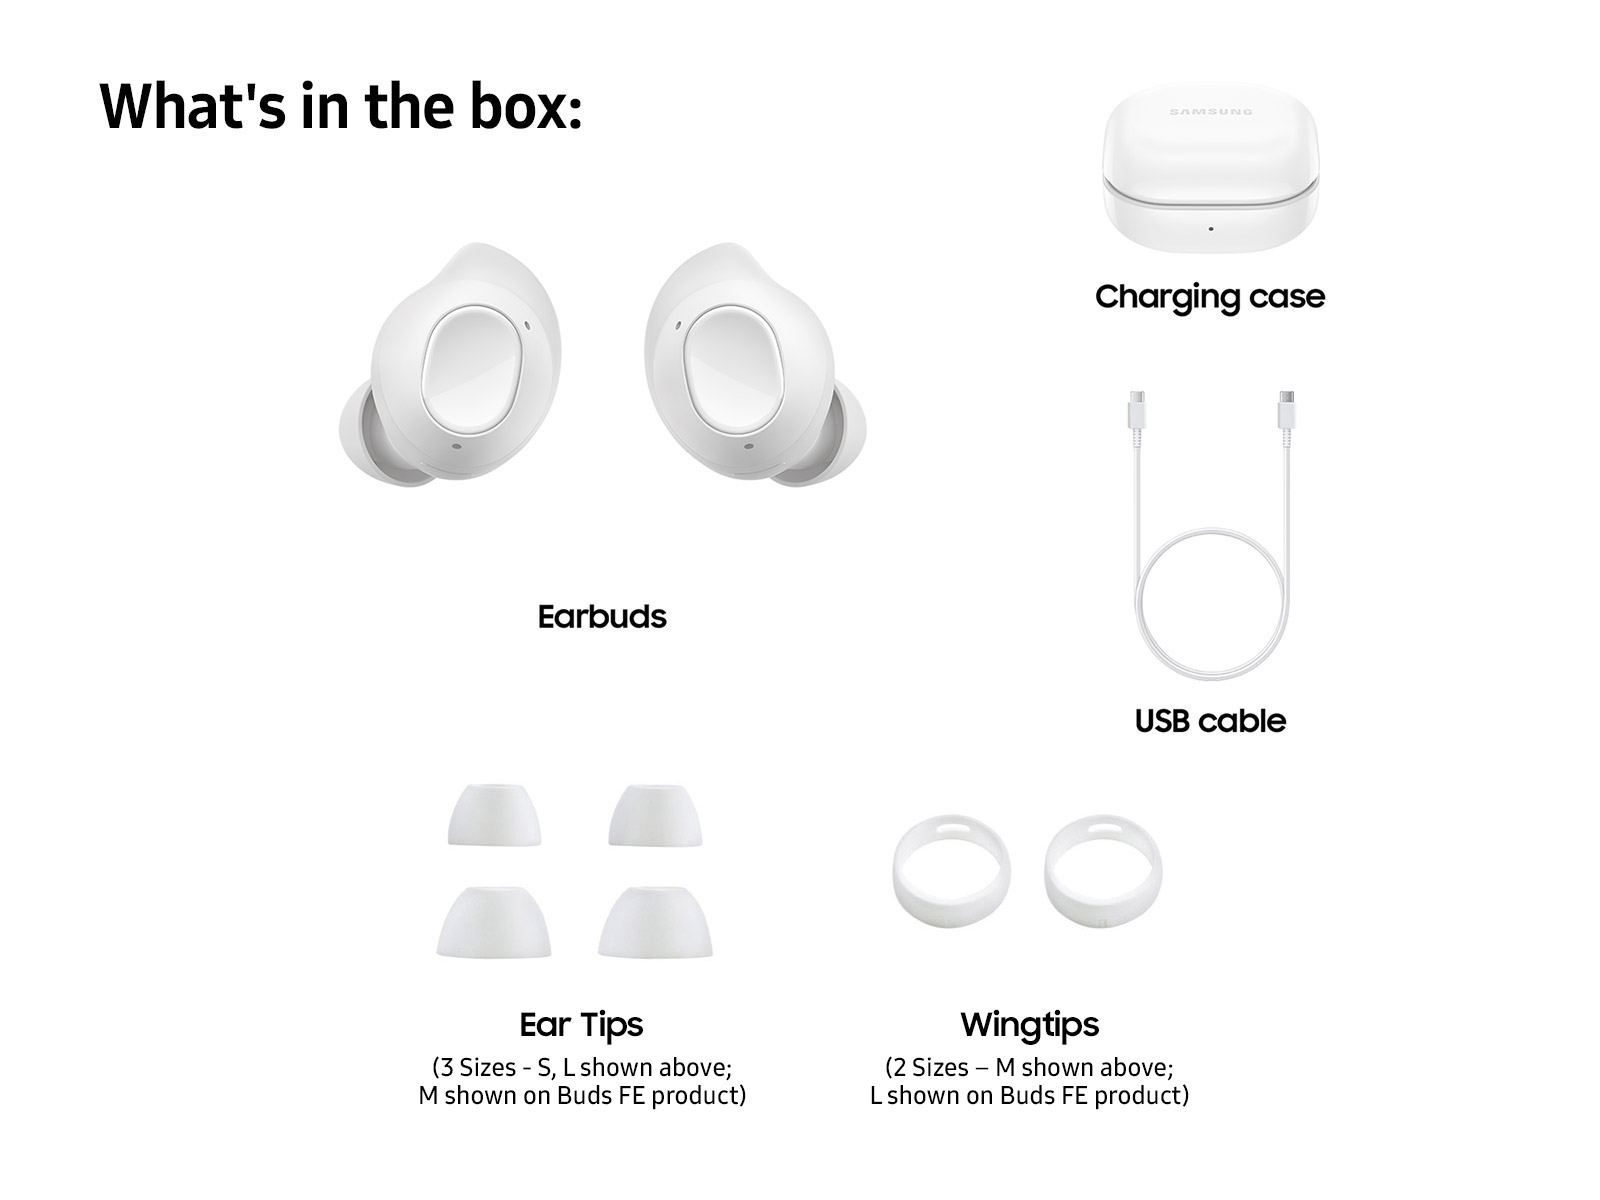 SAMSUNG Galaxy Buds, Black (Charging Case Included) 